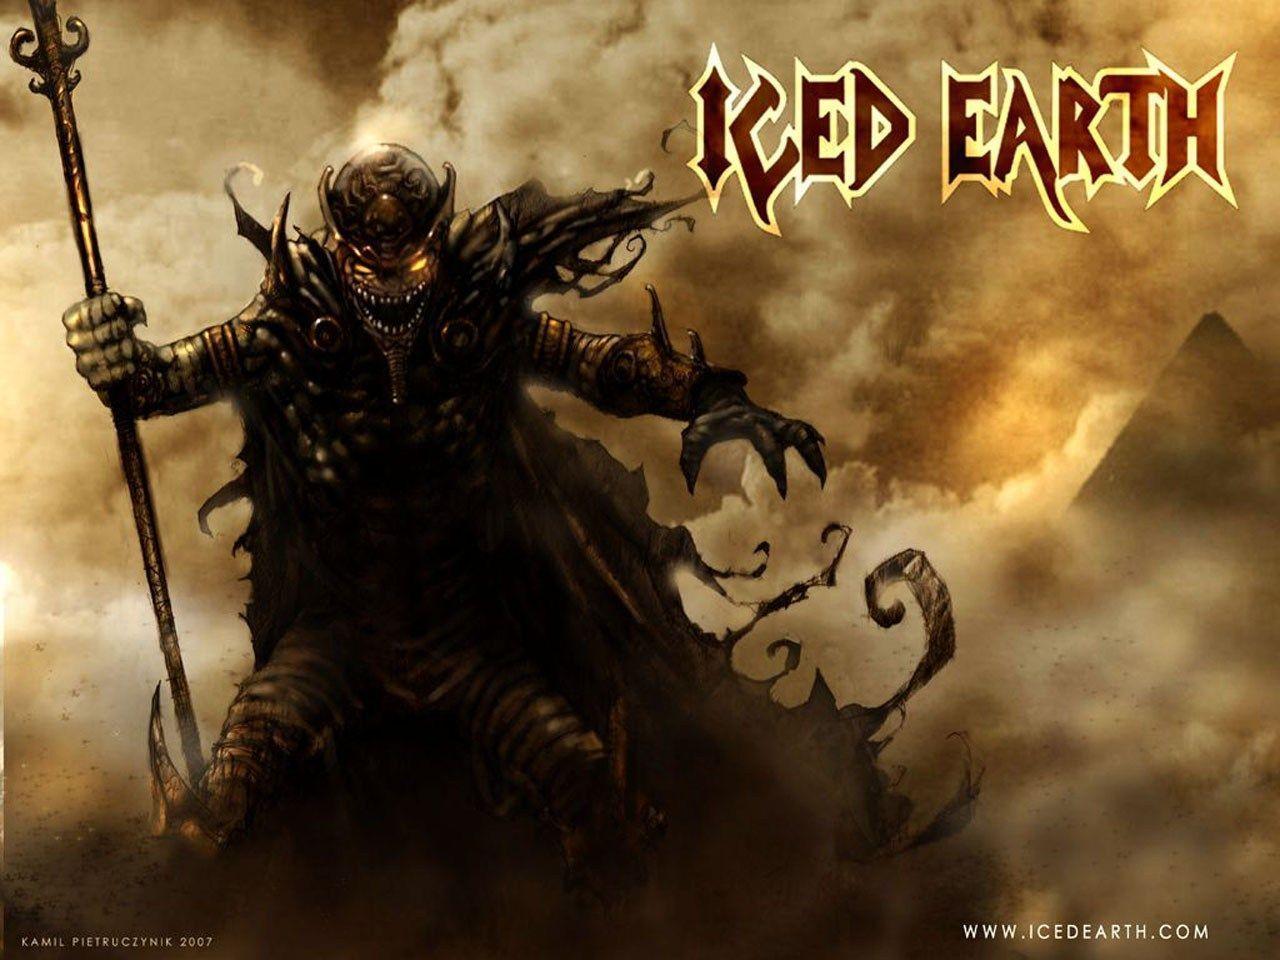 Iced Earth Computer Wallpapers, Desktop Backgrounds 1280x960 Id